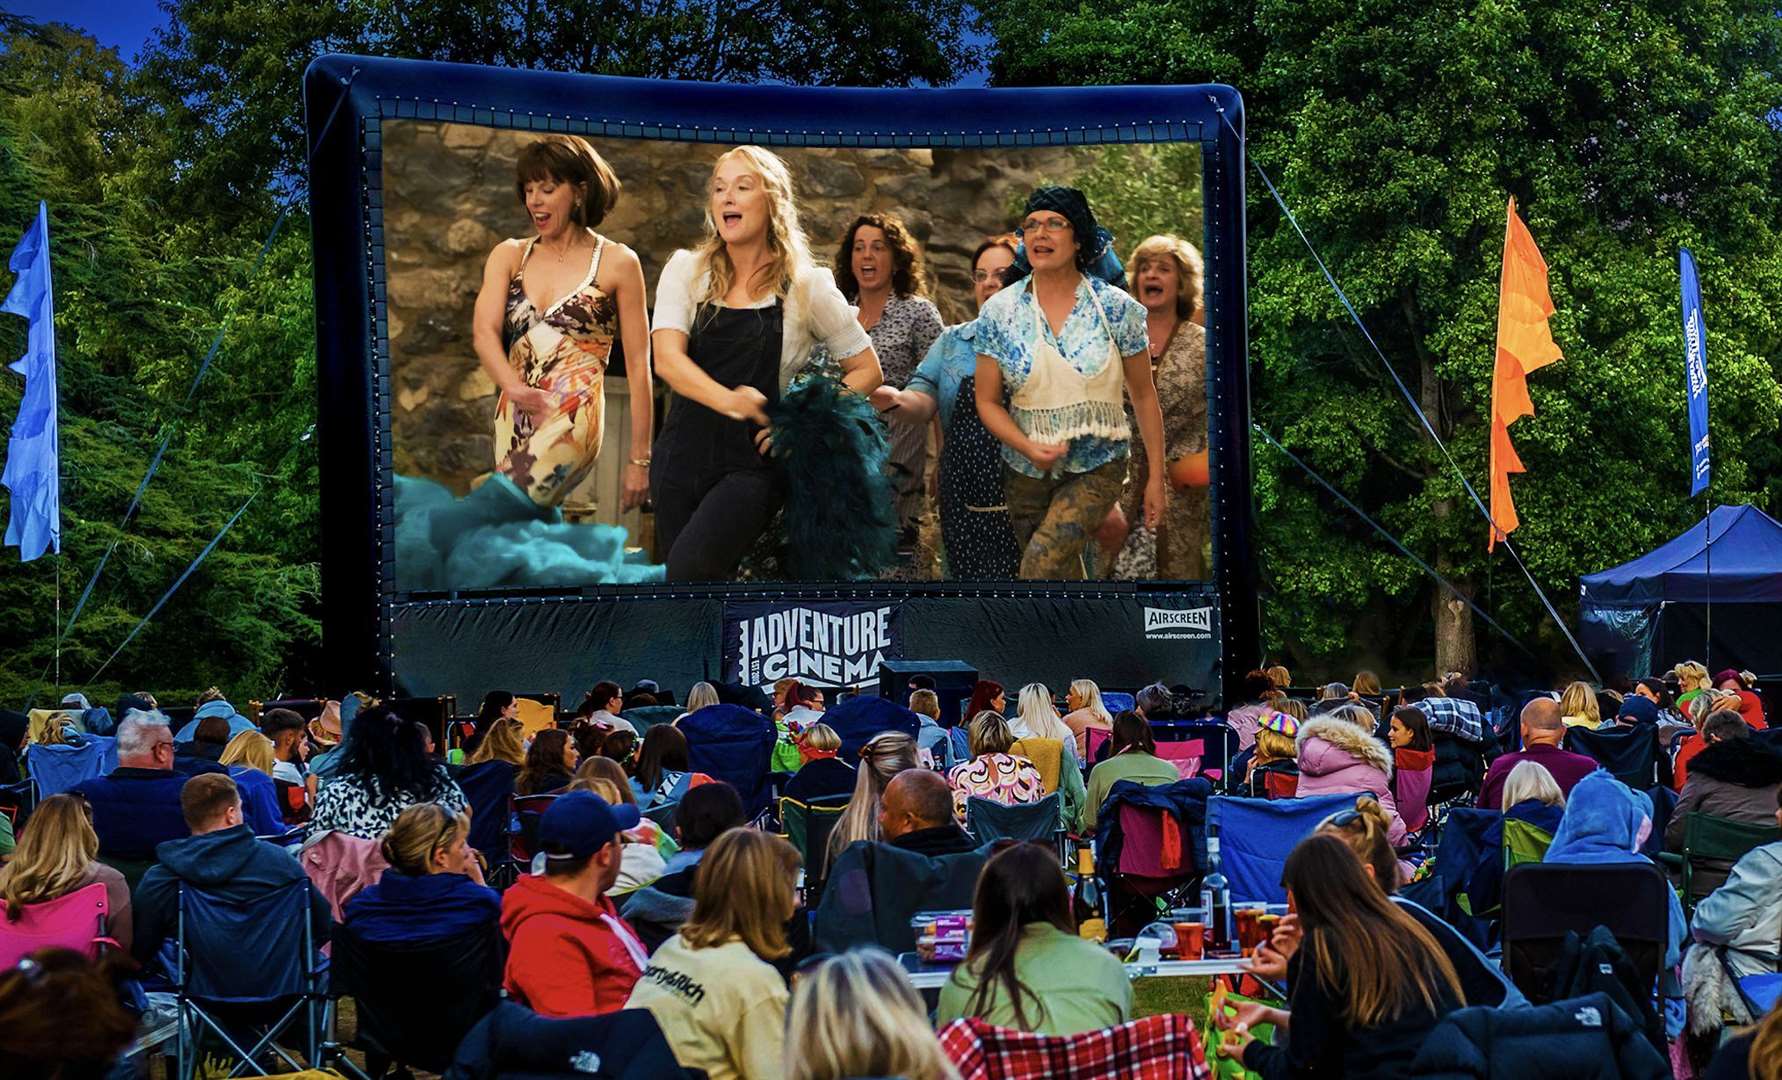 Films including Mamma Mia, Grease and the Greatest Showman will be shown on an outdoor screen this summer. Picture: Adventure Cinema